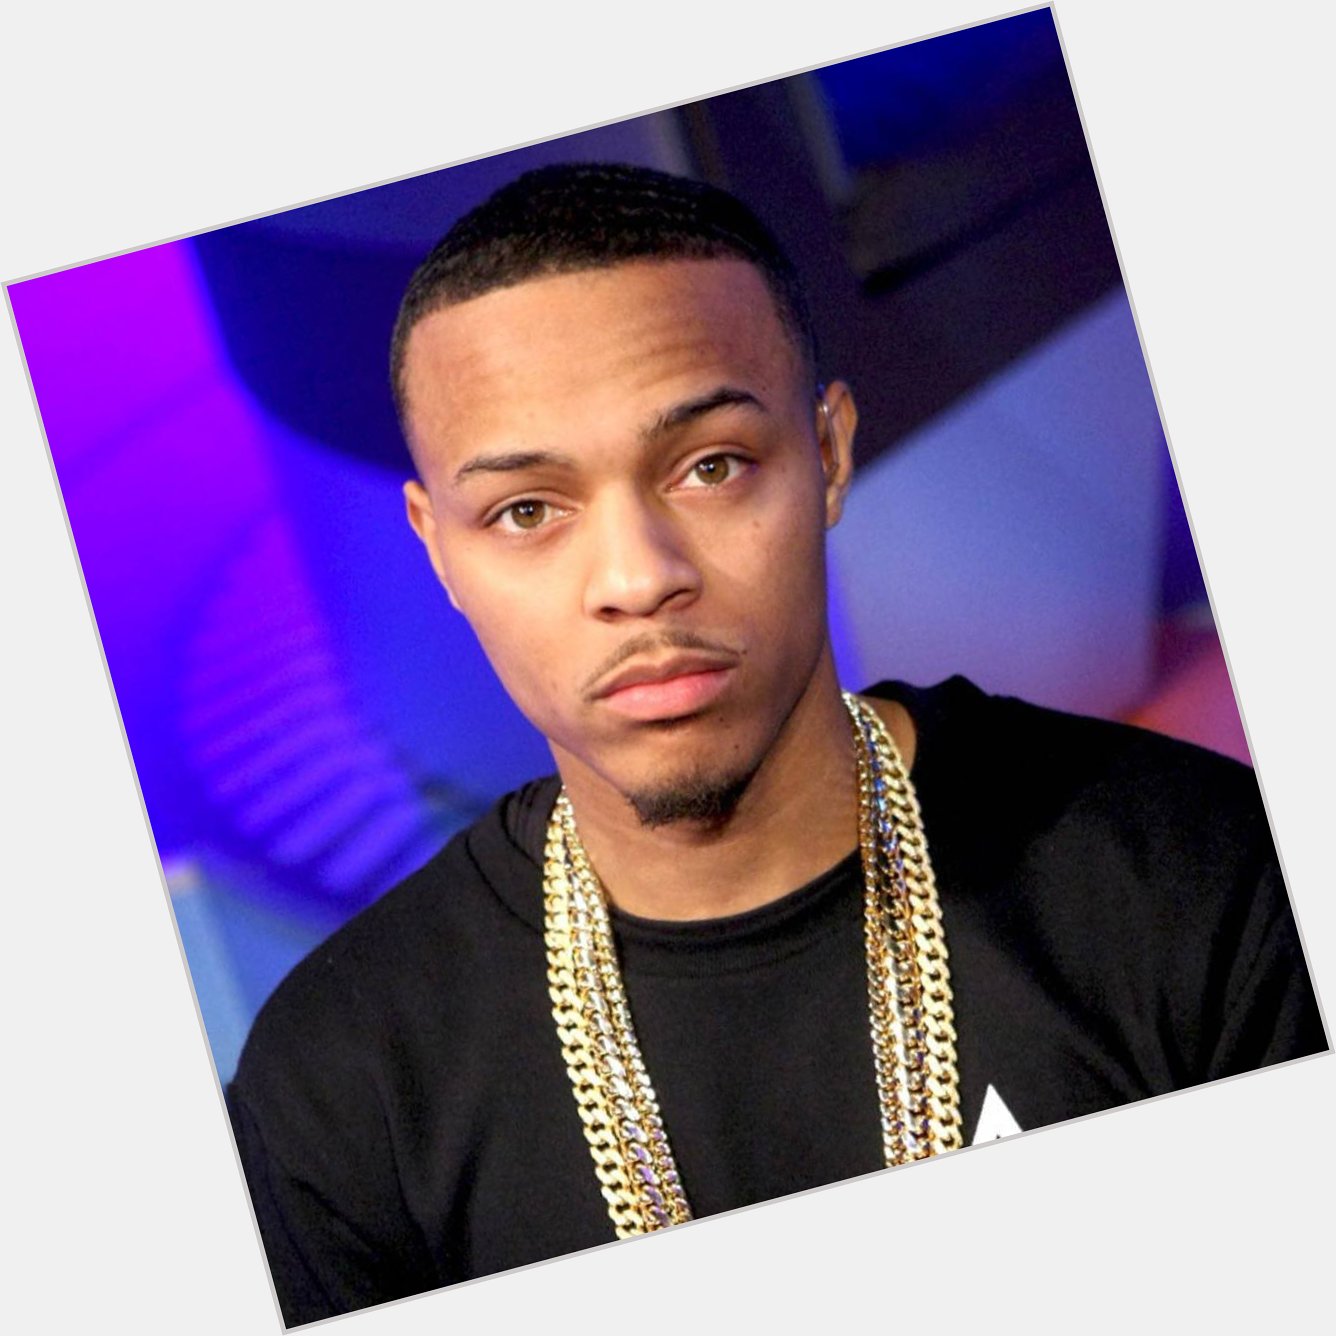 Happy 34th Birthday to Shad Bow Wow Moss  . What s your fav Bow Wow hit?  